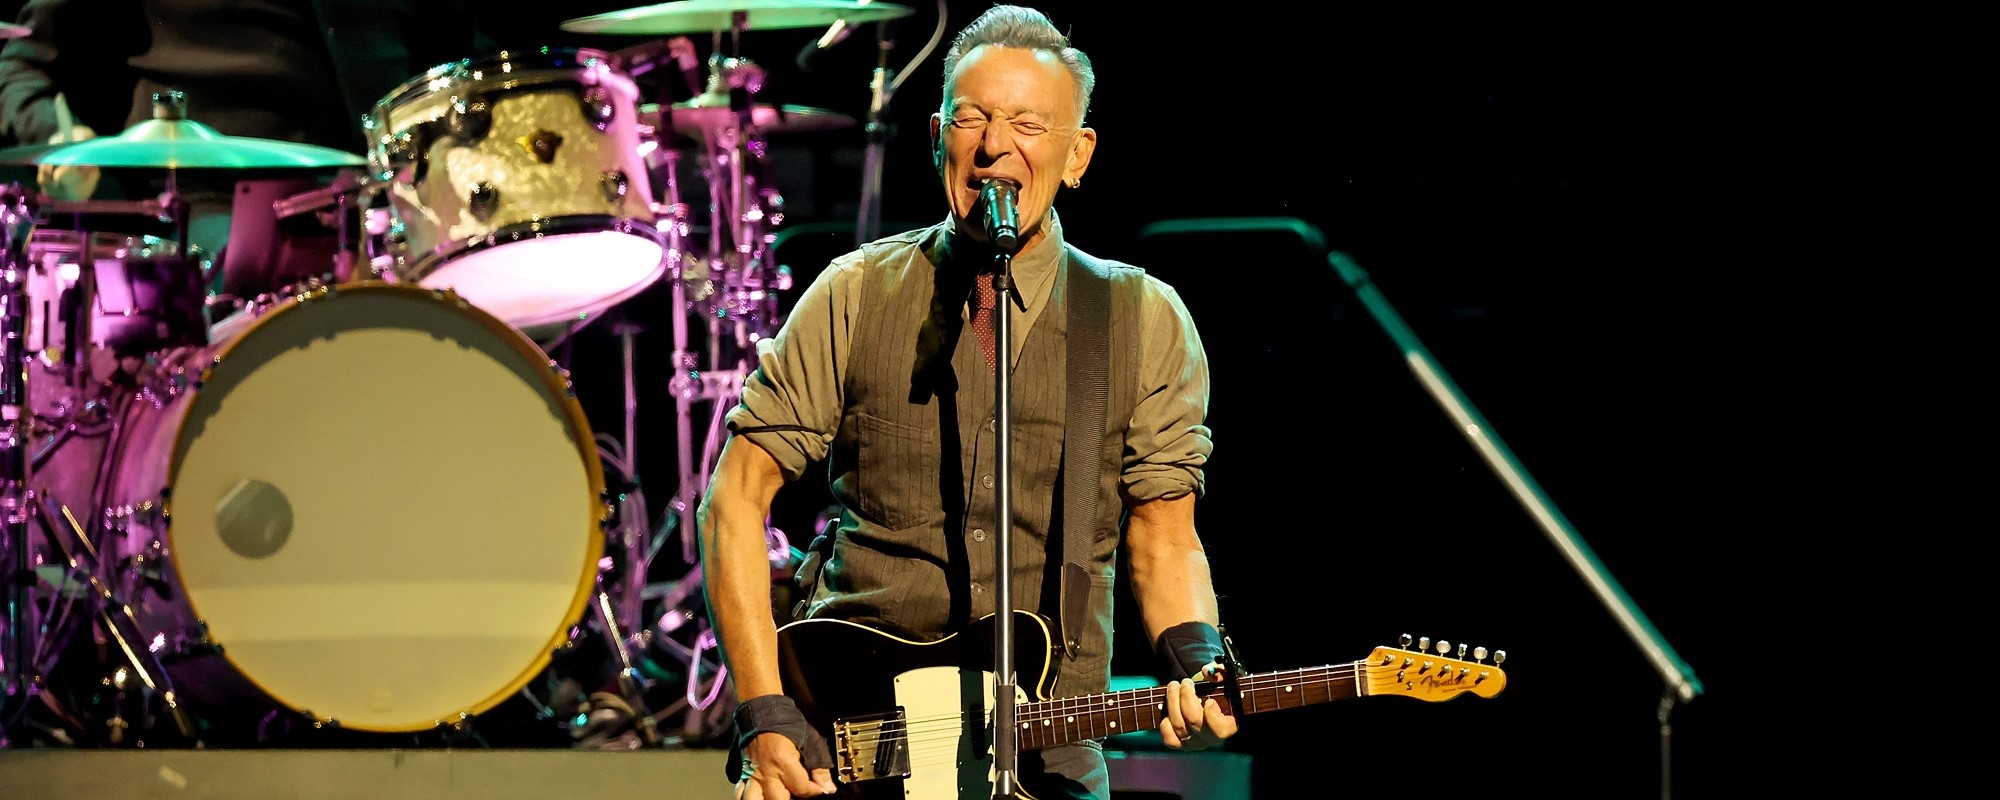 Bruce Springsteen Shares Funny Memory About His First Show in Syracuse from 1973